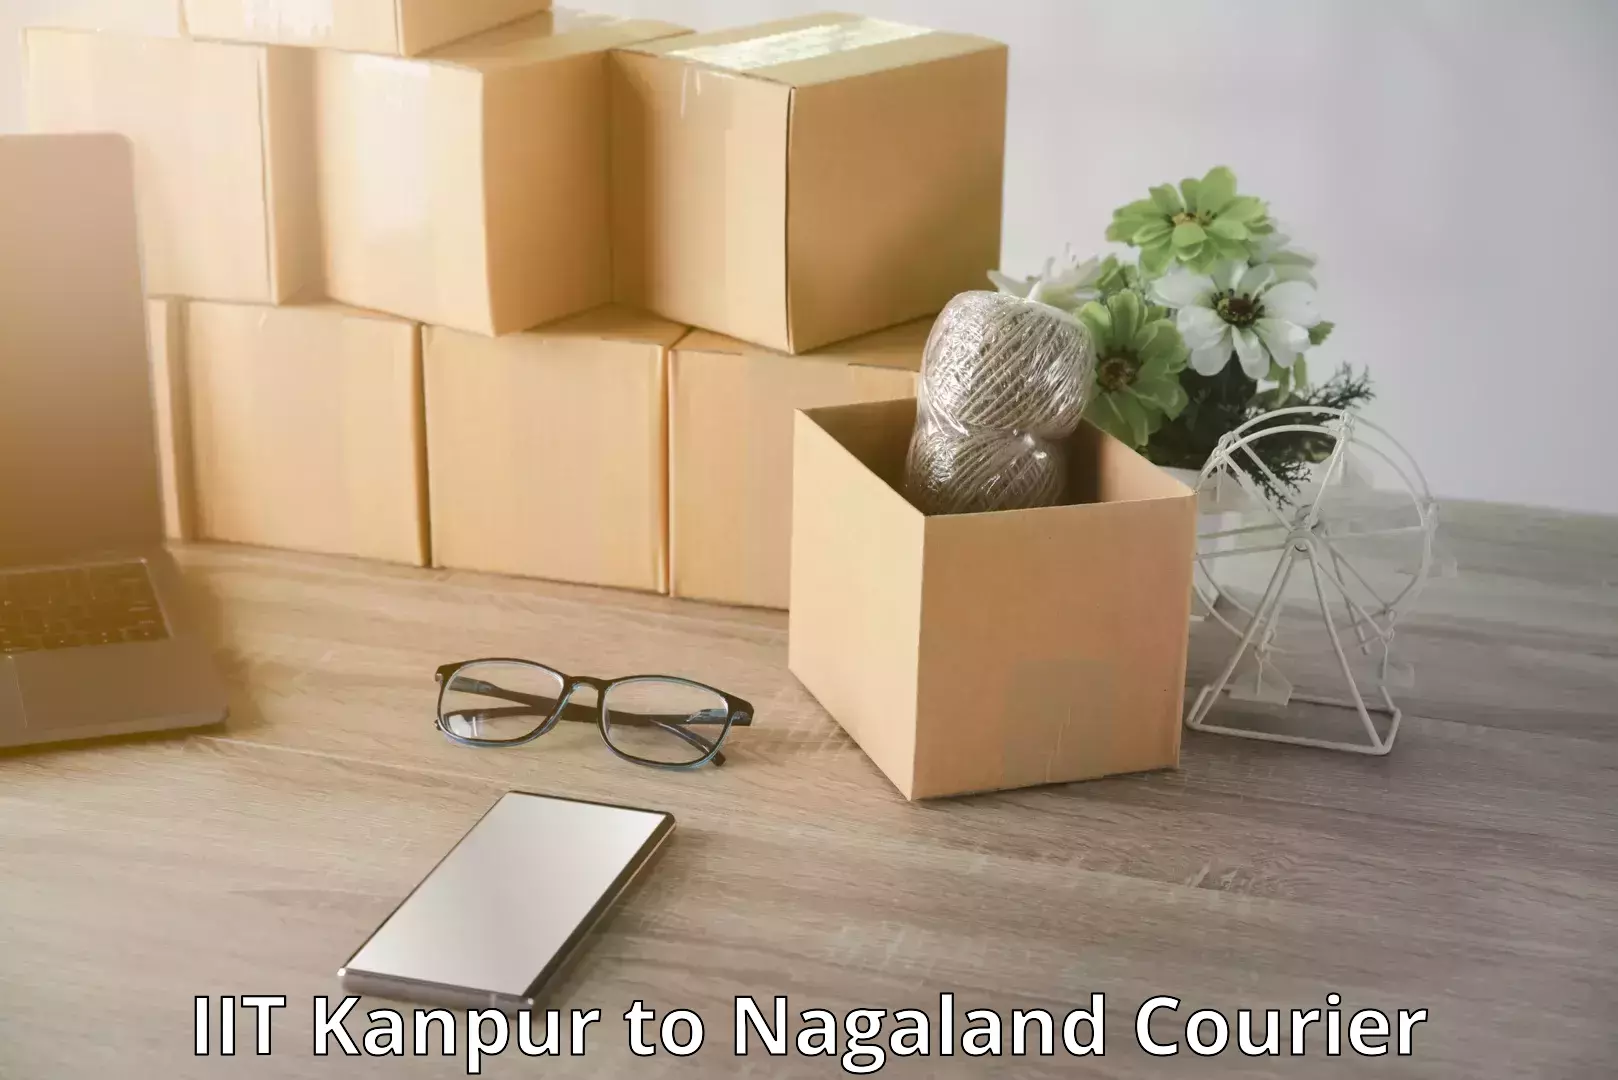 Luggage shipment specialists IIT Kanpur to Nagaland